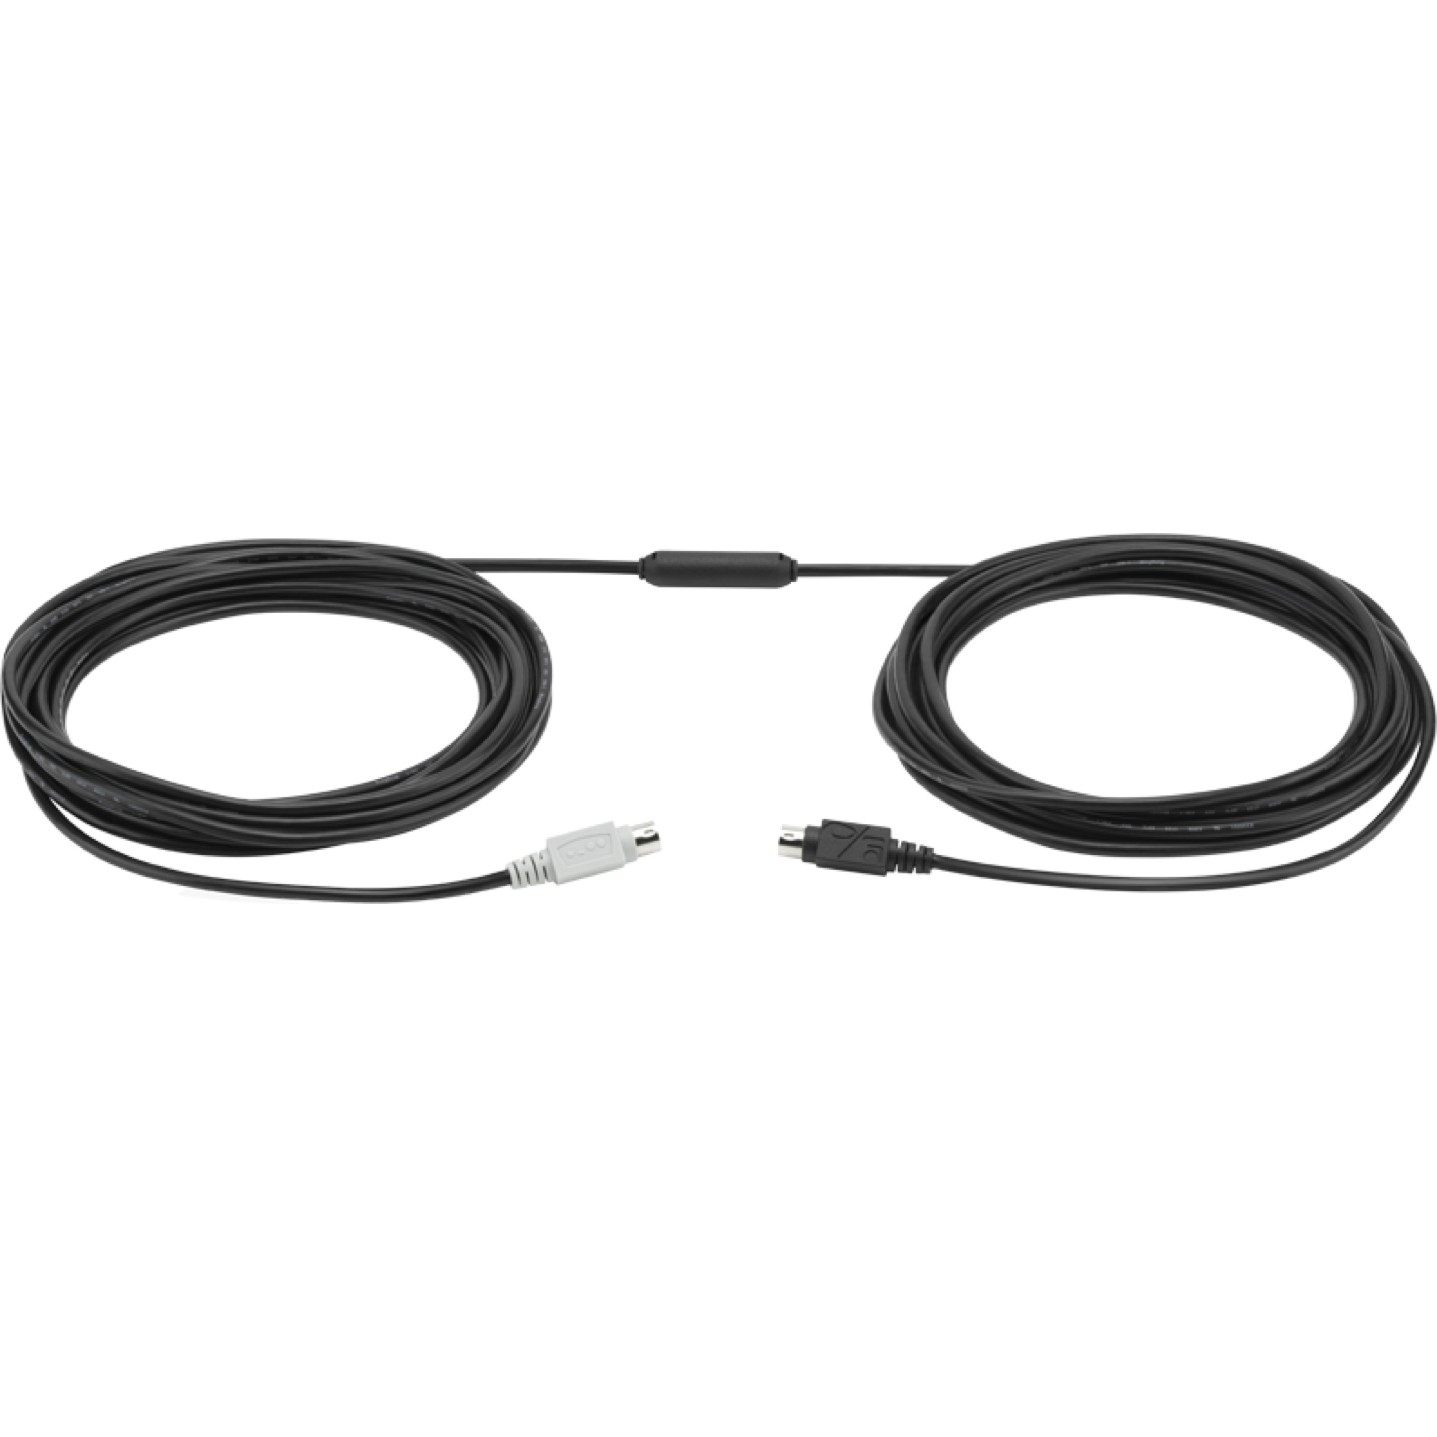 LOGITECH 10m. GROUP extended cable